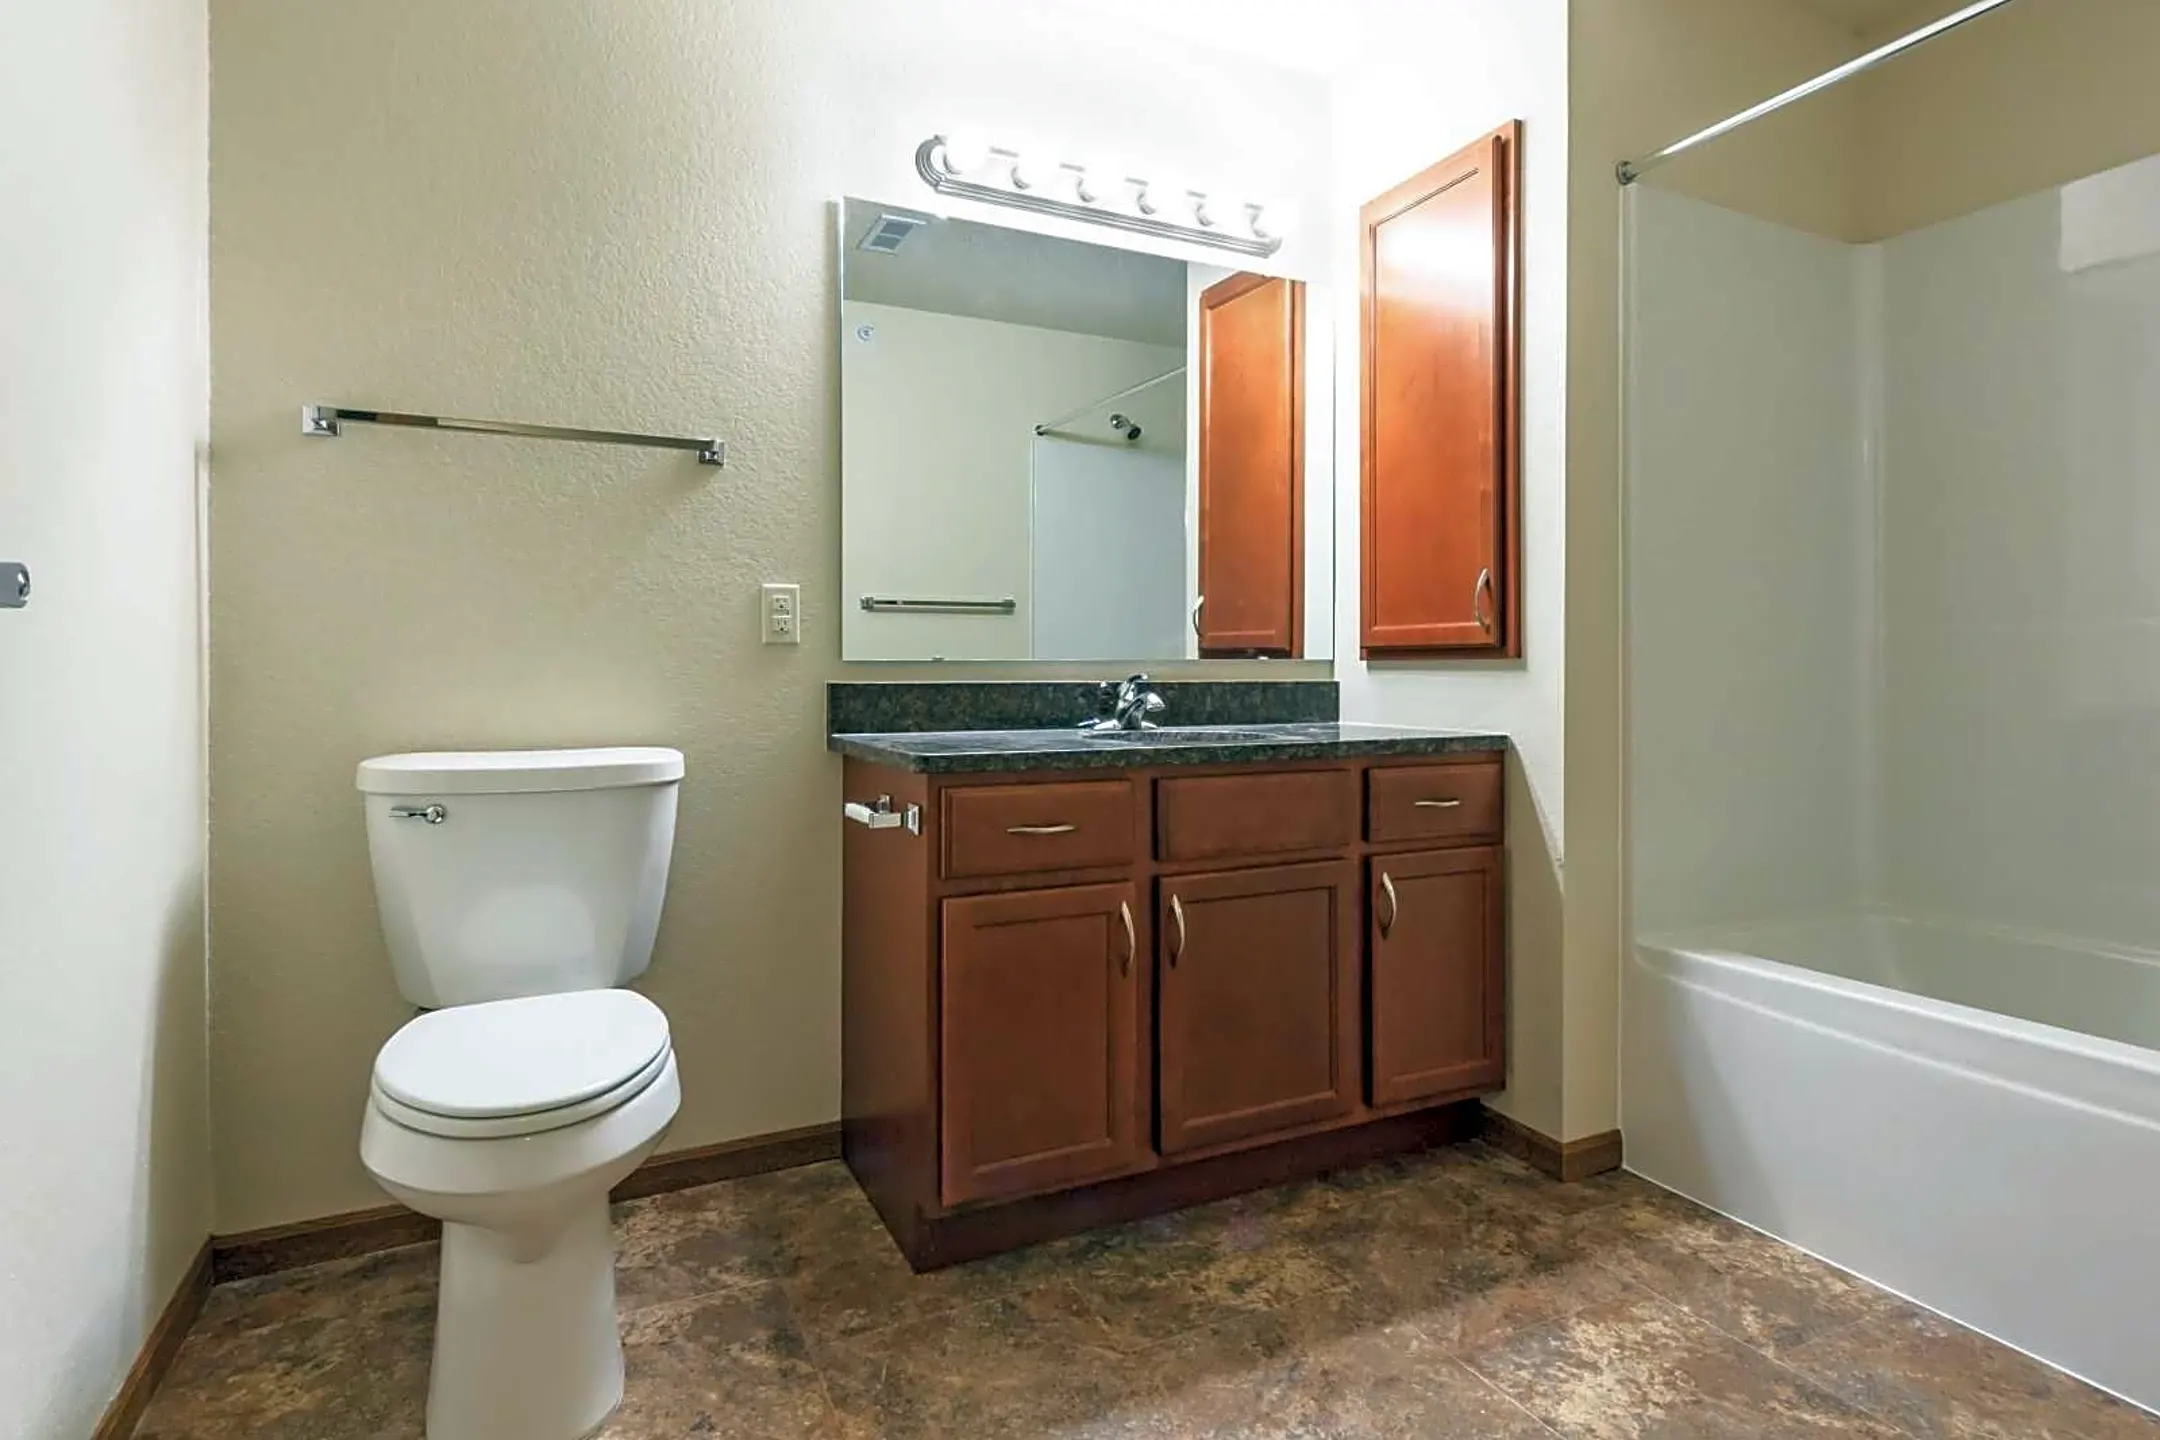 Bathroom - Dakota Commons Townhomes and Apartments - West Fargo, ND